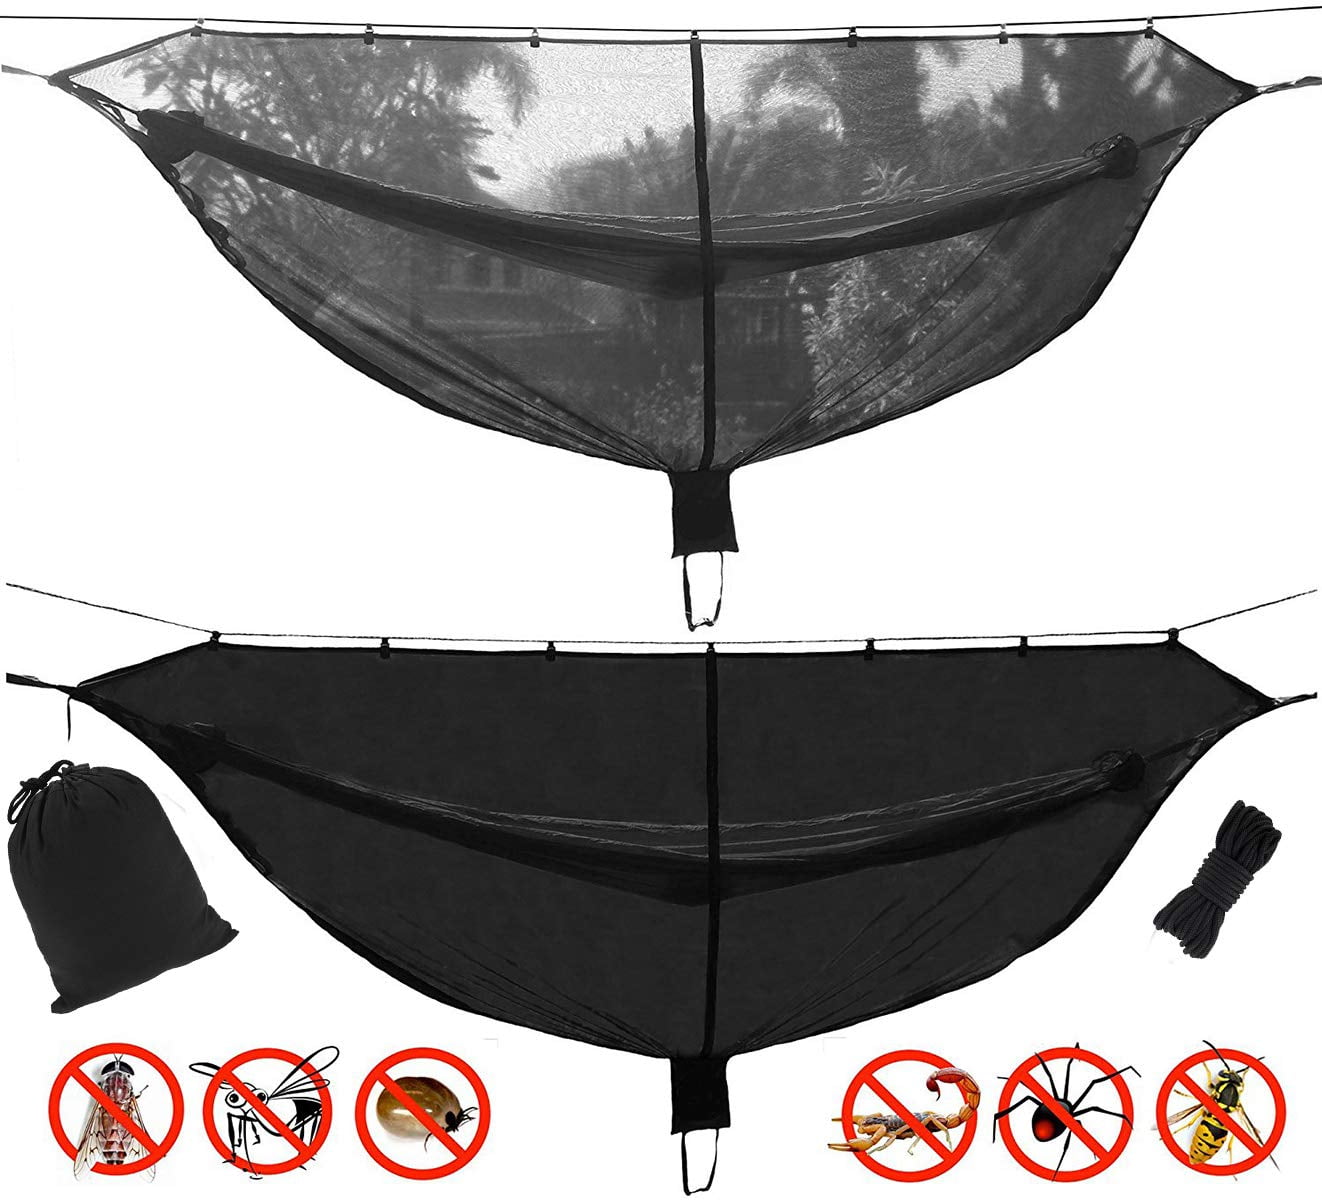 Easy Access Hammock Mosquito Net for 360 Degree Protection Fits All Hammocks 